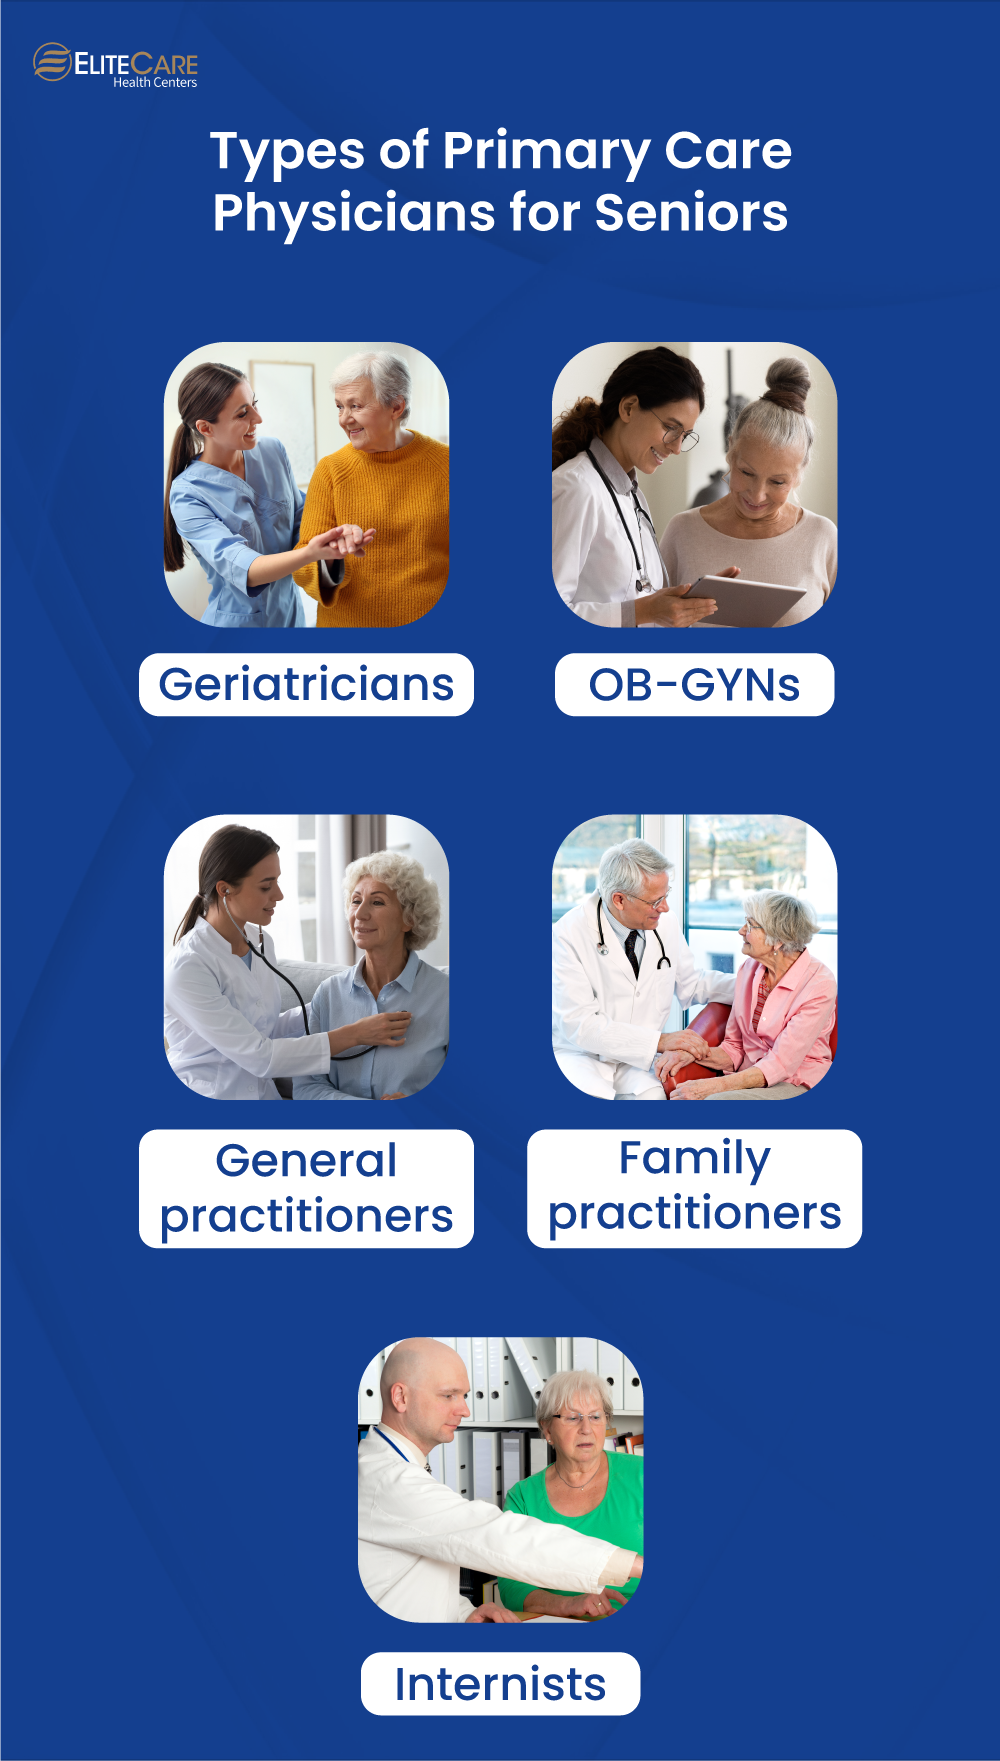 Types of Primary Care Physicians for Seniors